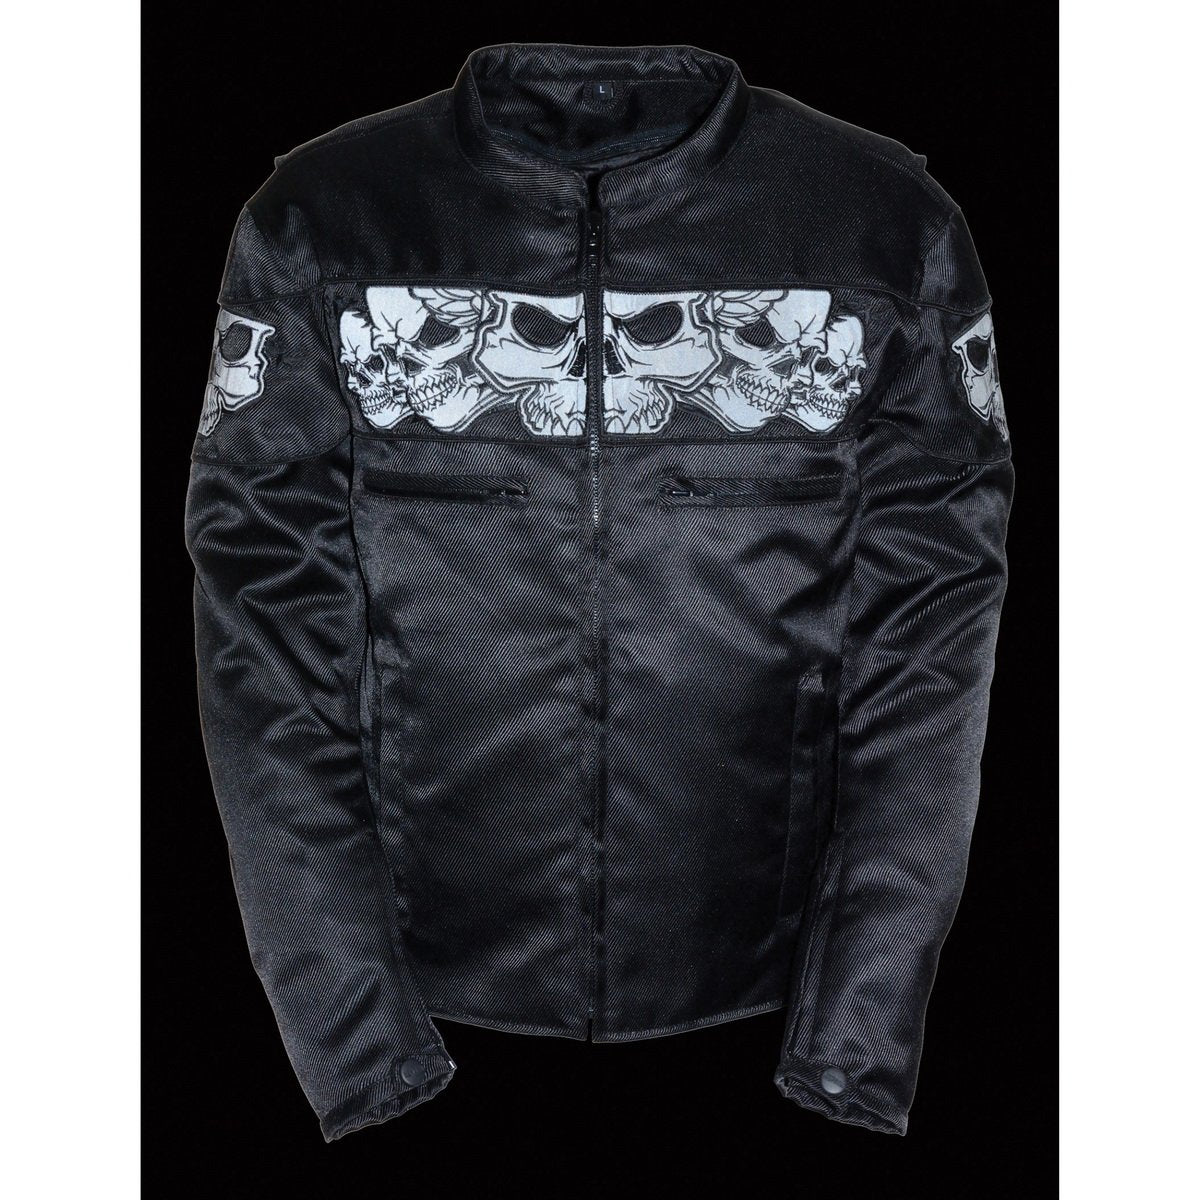 Milwaukee Leather MPM1730 Men's Black Textile Jacket with Reflective Skulls and Gun Pocket with Gun Pockets - Milwaukee Leather Mens Textile Jackets